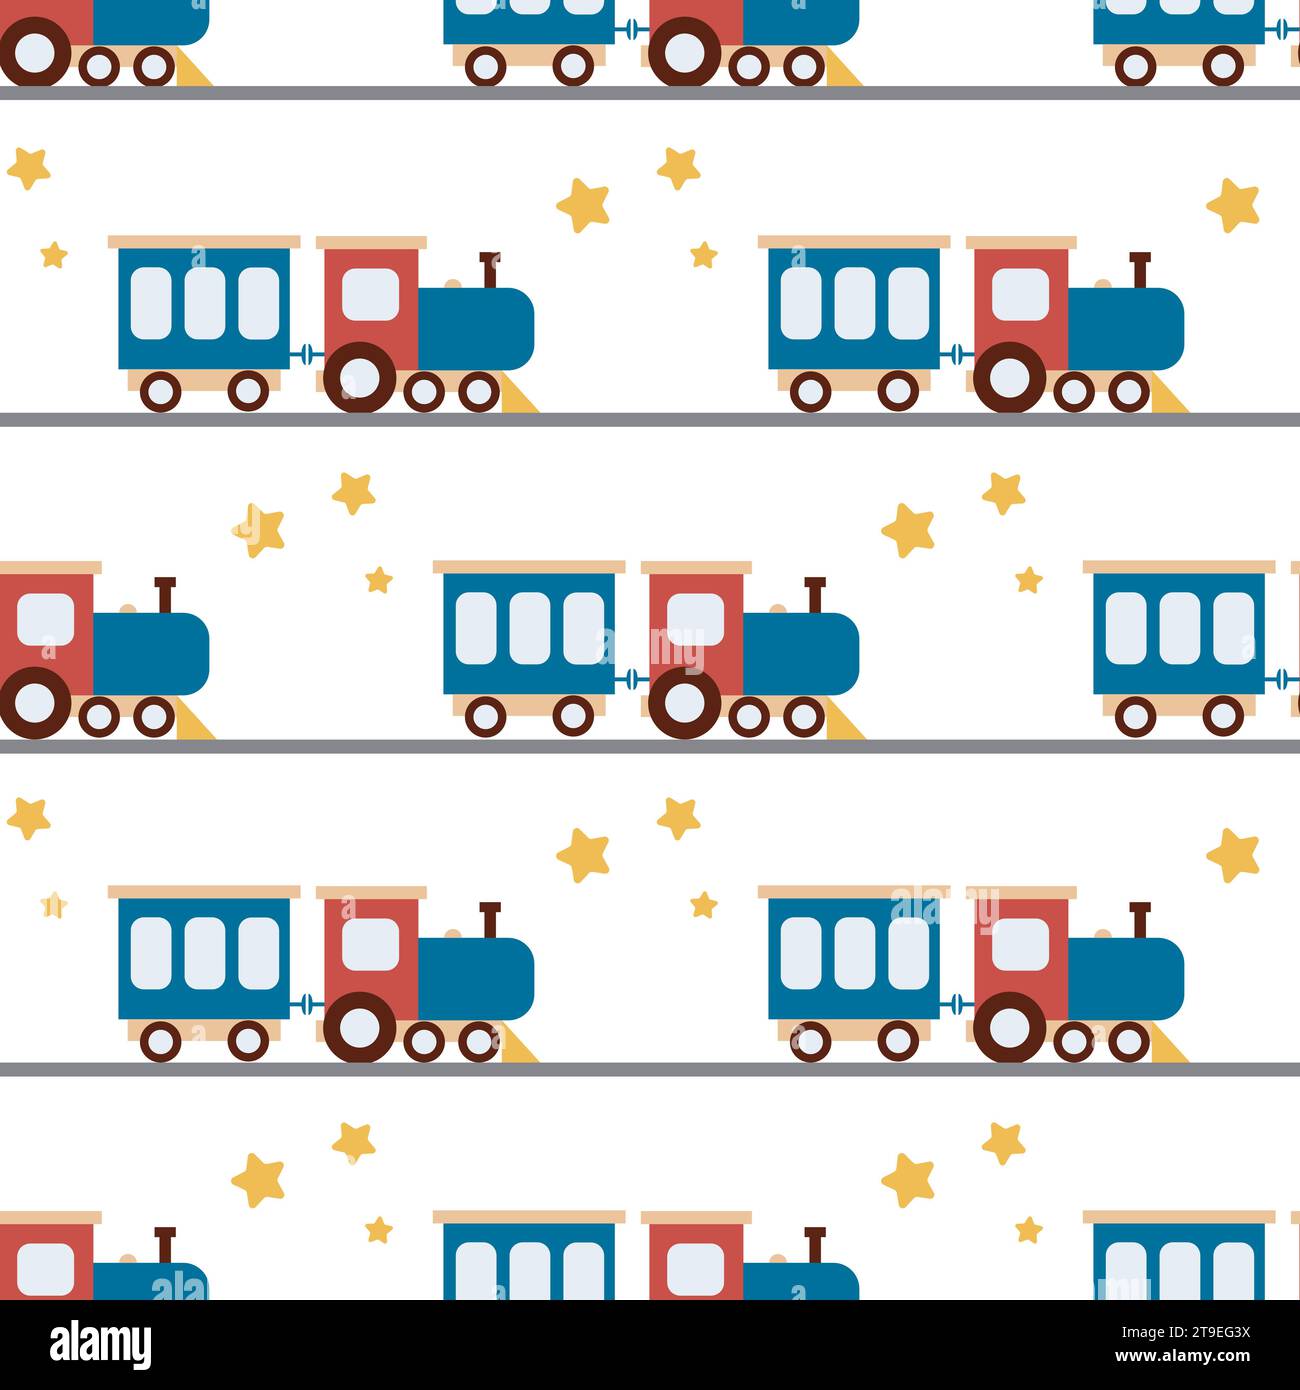 Baby steam locomotive seamless pattern. Railroad with trains background. Stars and transport print for boy textiles, packaging, kid clothing Stock Vector